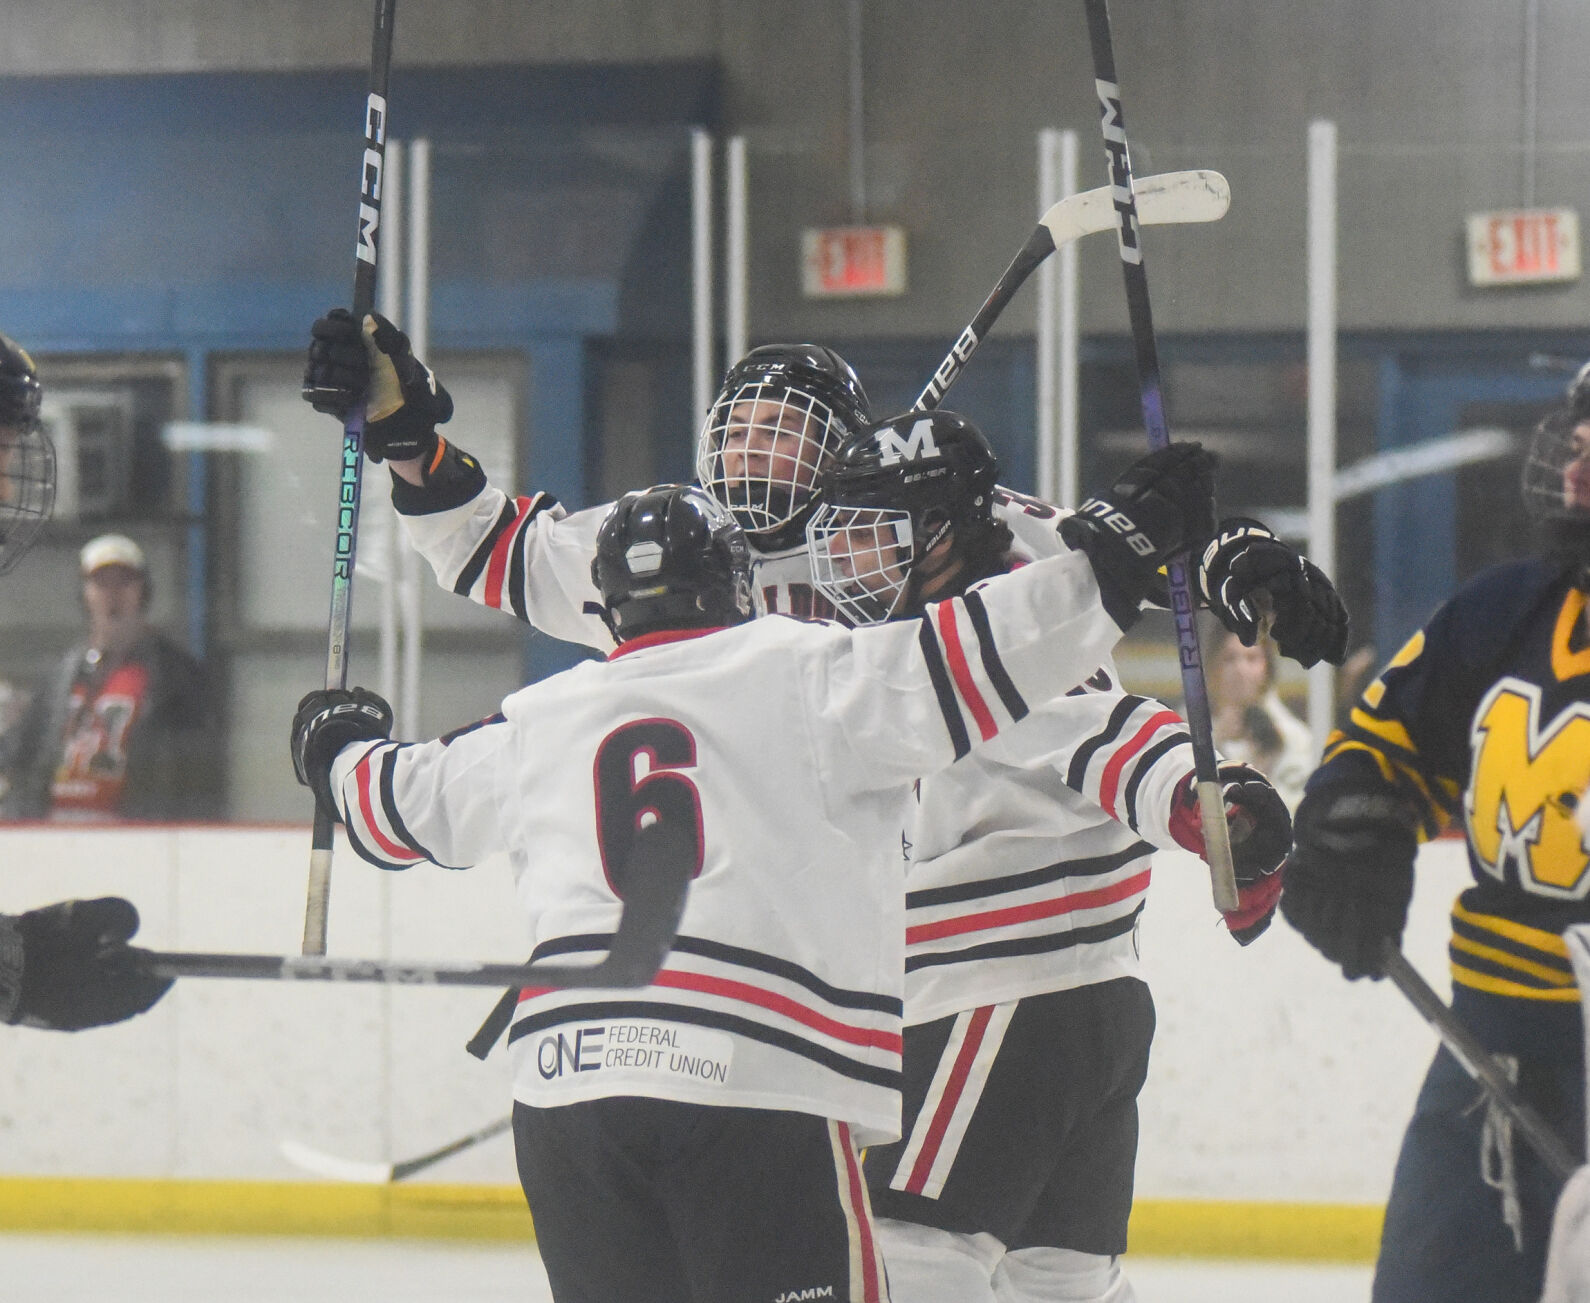 Meadville Bulldogs Edge Past Mars in Thrilling 5-3 Victory to Secure Playoff Hopes